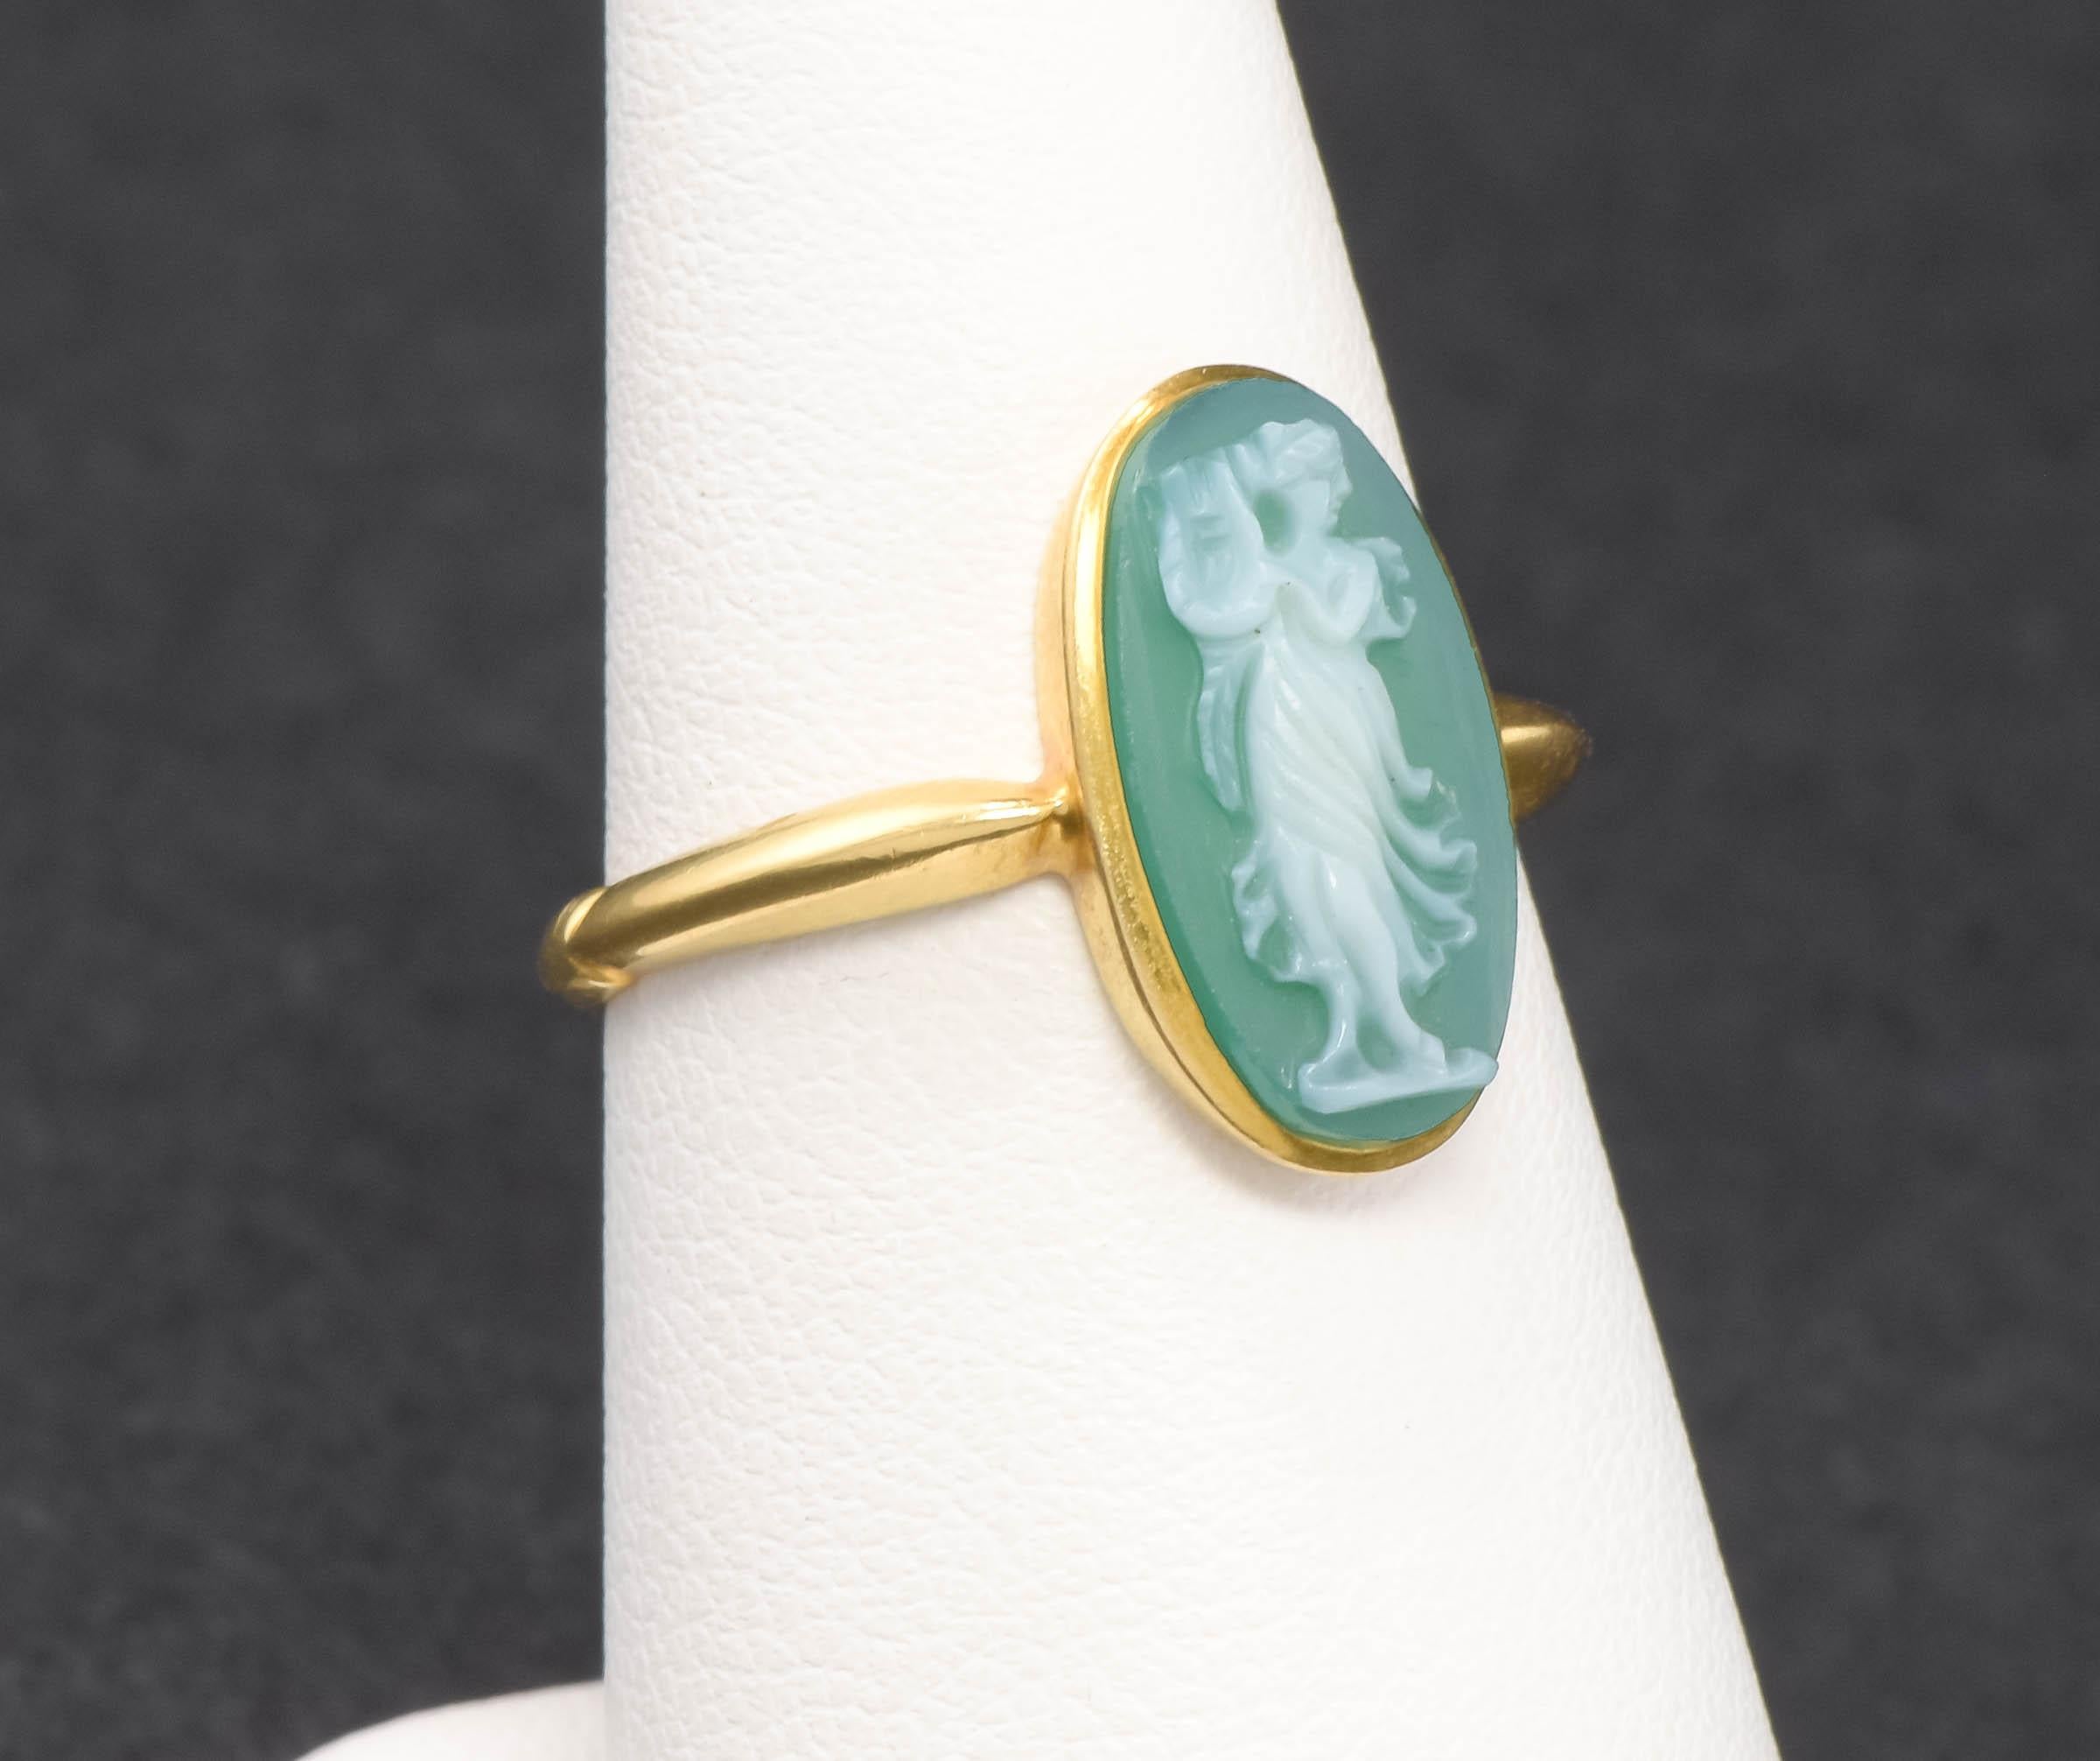 Carved Green Chalcedony Cameo Ring in 18K Gold, Hallmarked Chester 1909 1